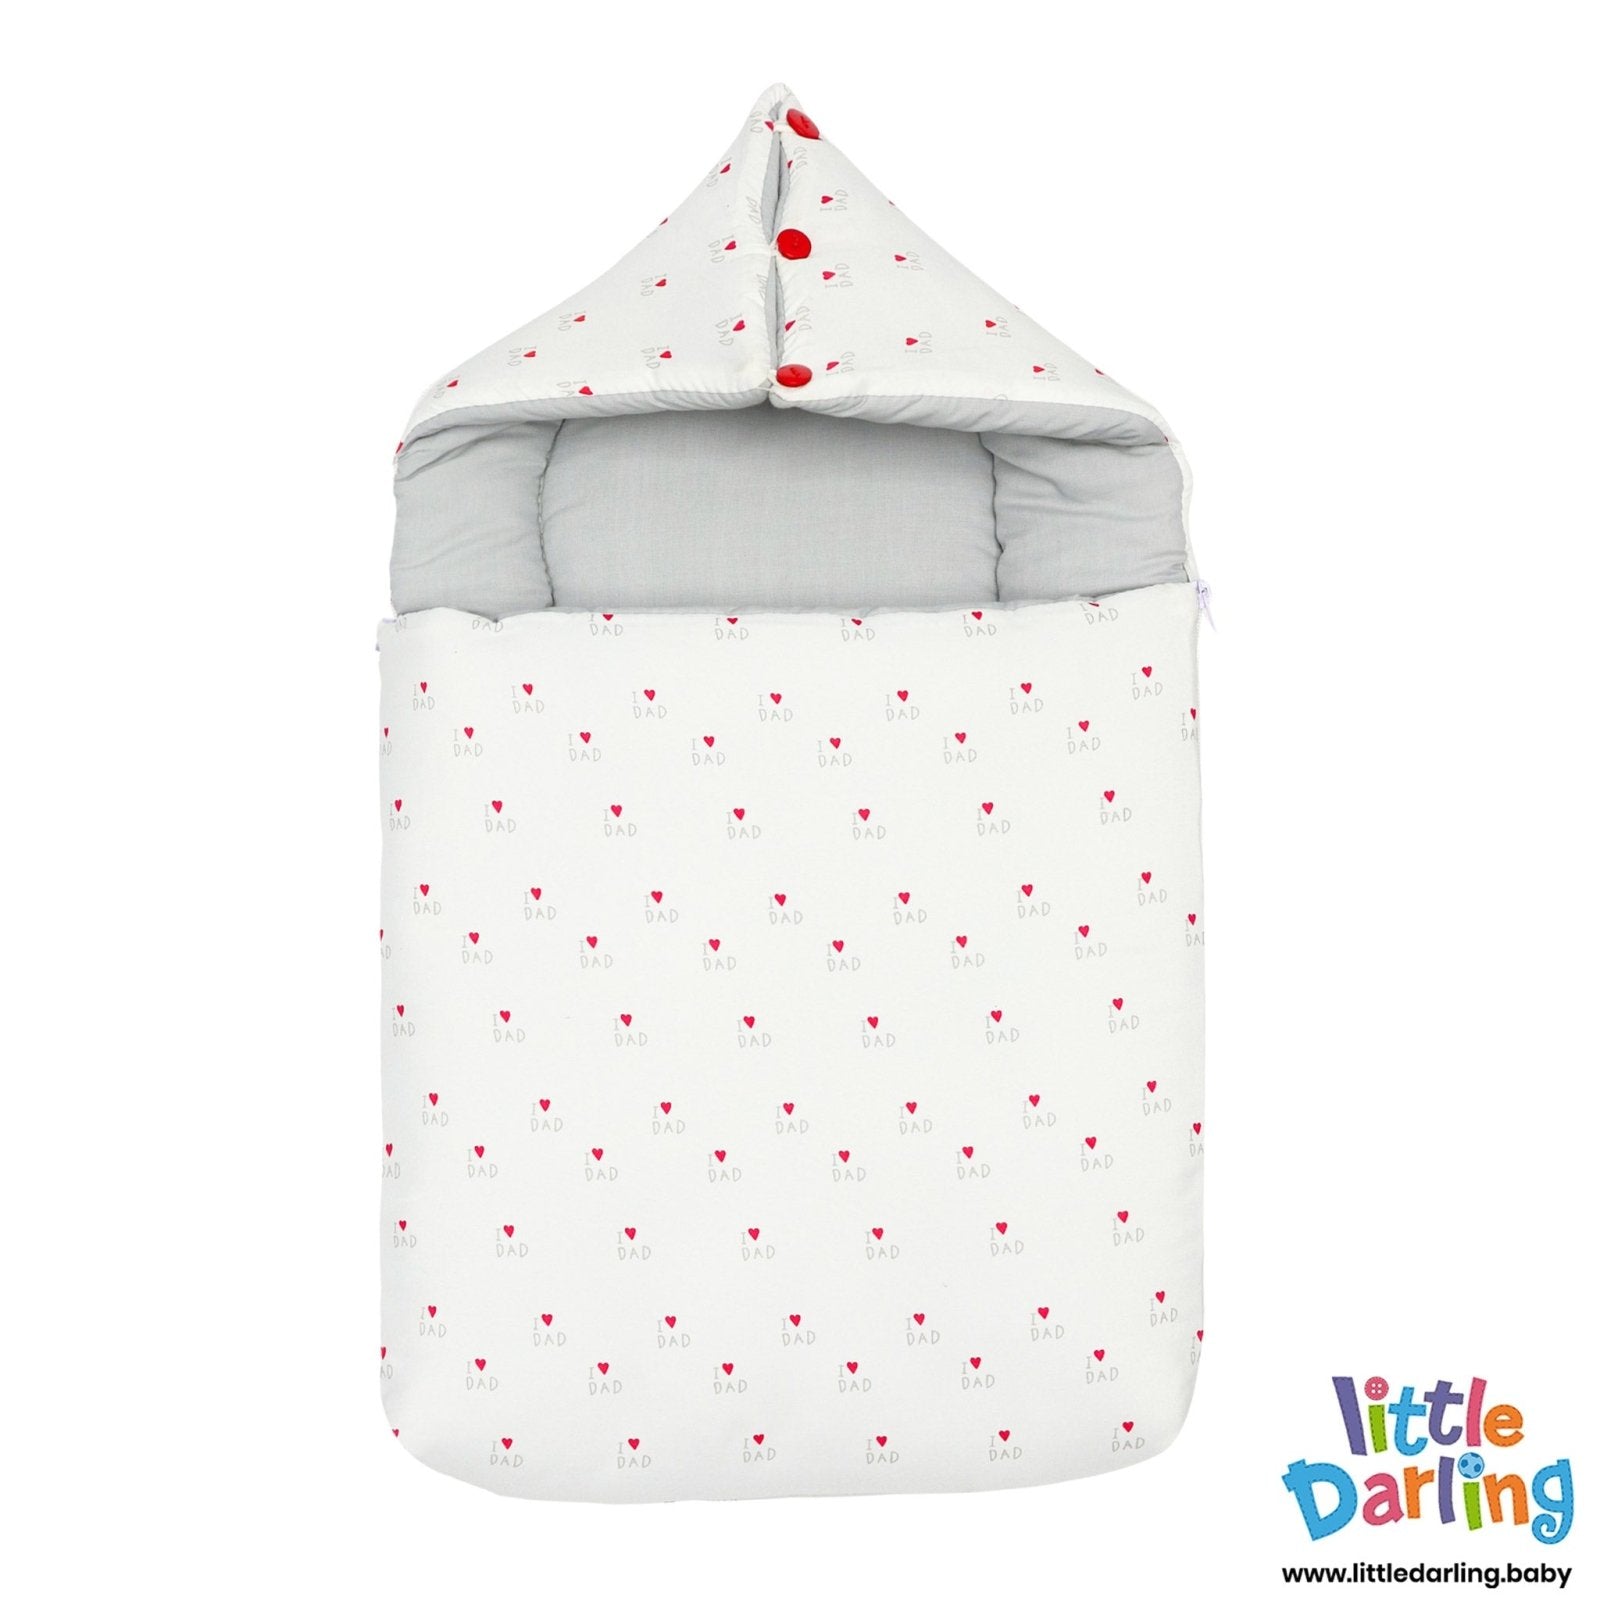 Carry Nest Hooded I love dad by Little Darling